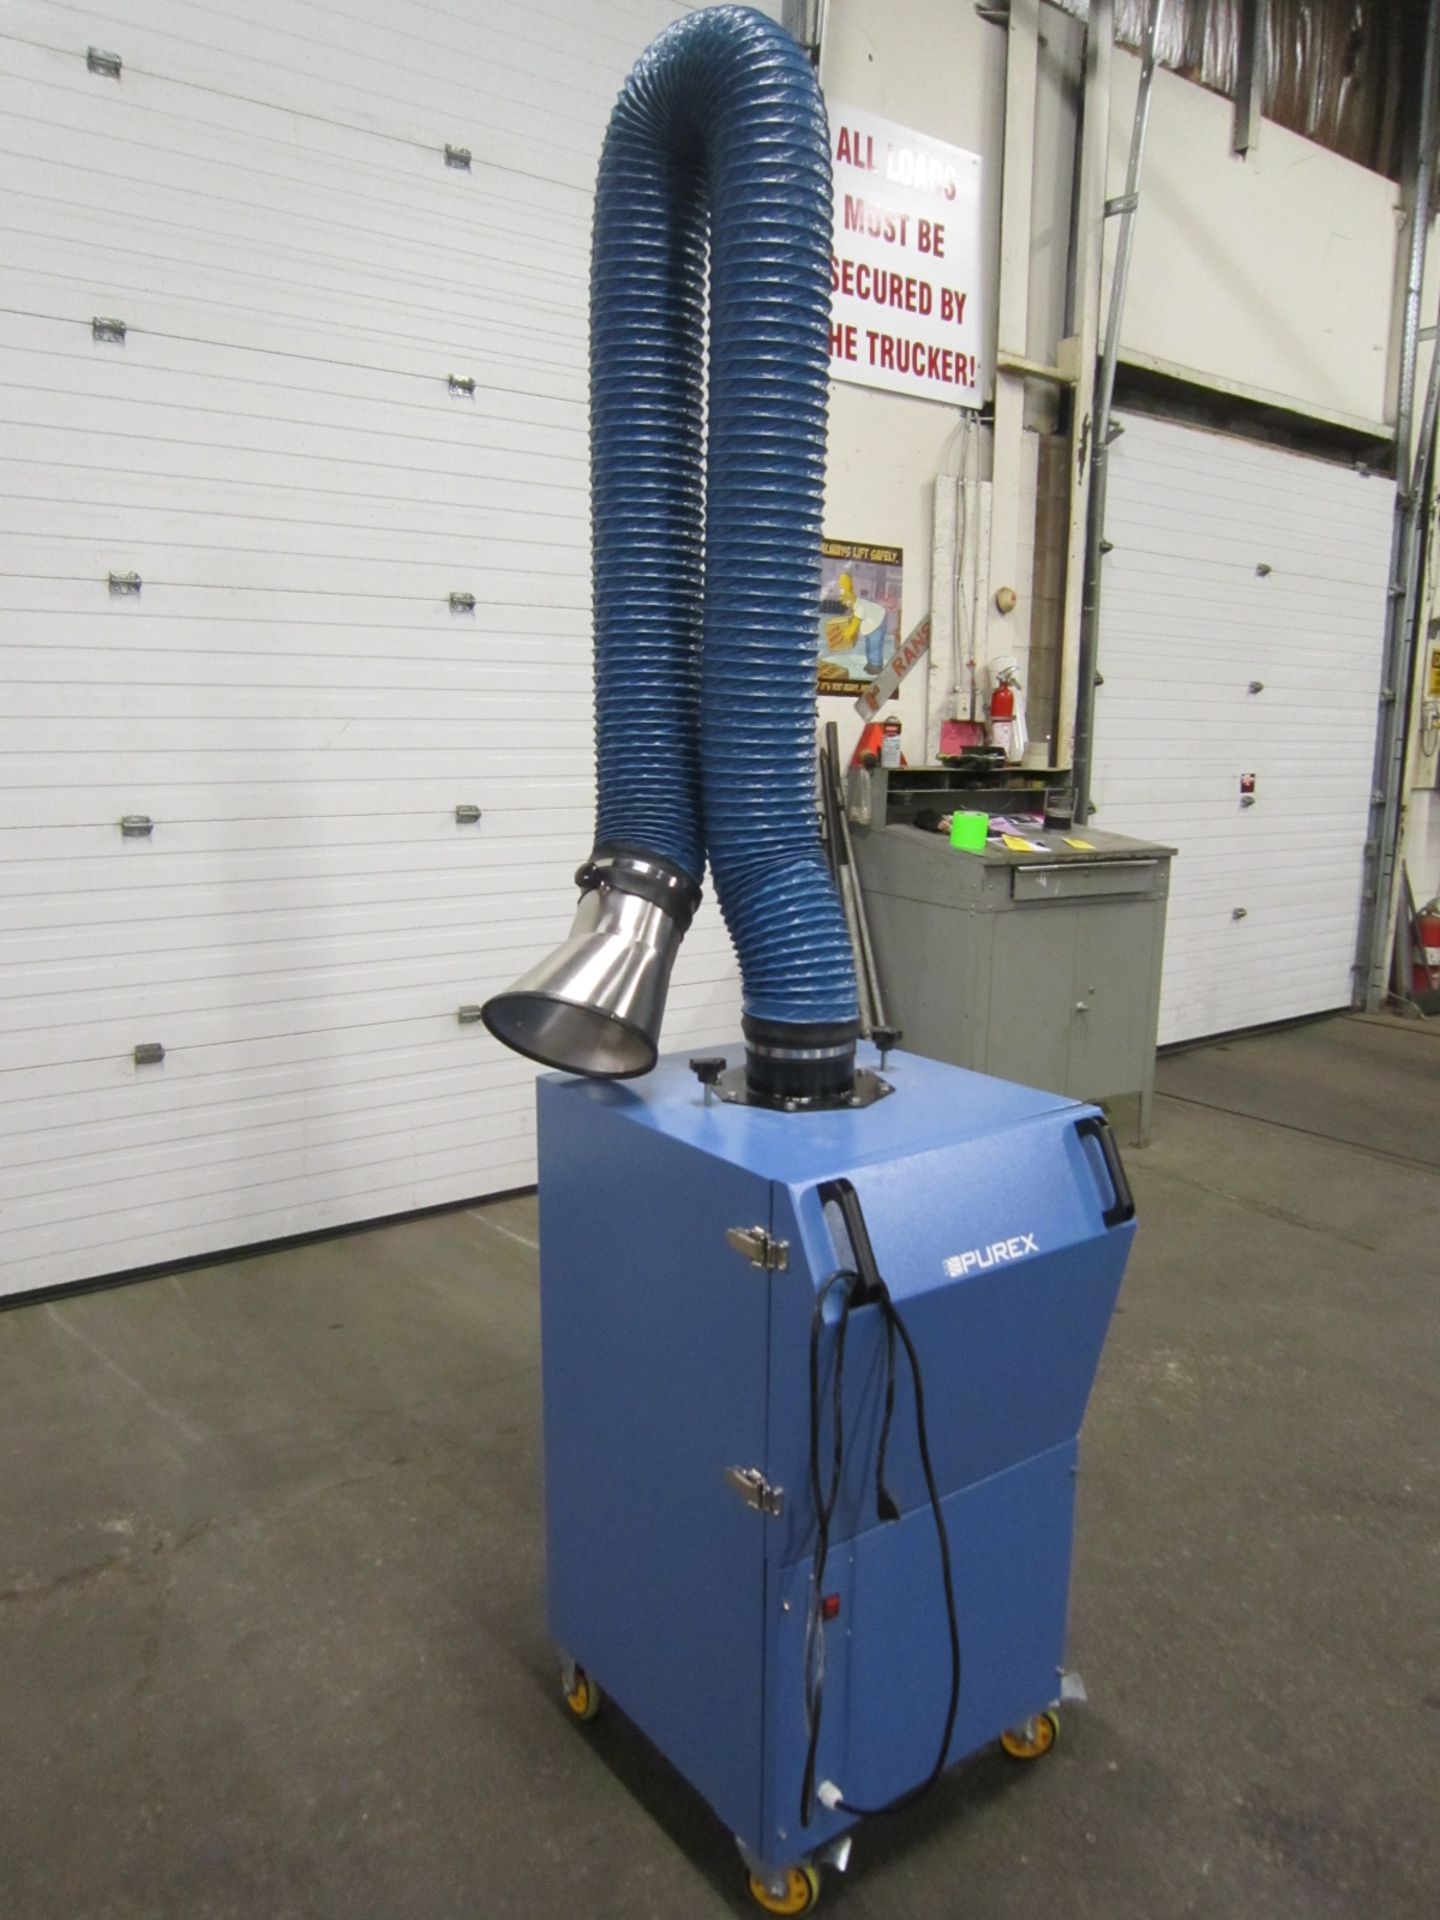 Purex Fume Extractor with long reach snorkel arm - 120V single phase - MINT & UNUSED - CLEAN FILTER